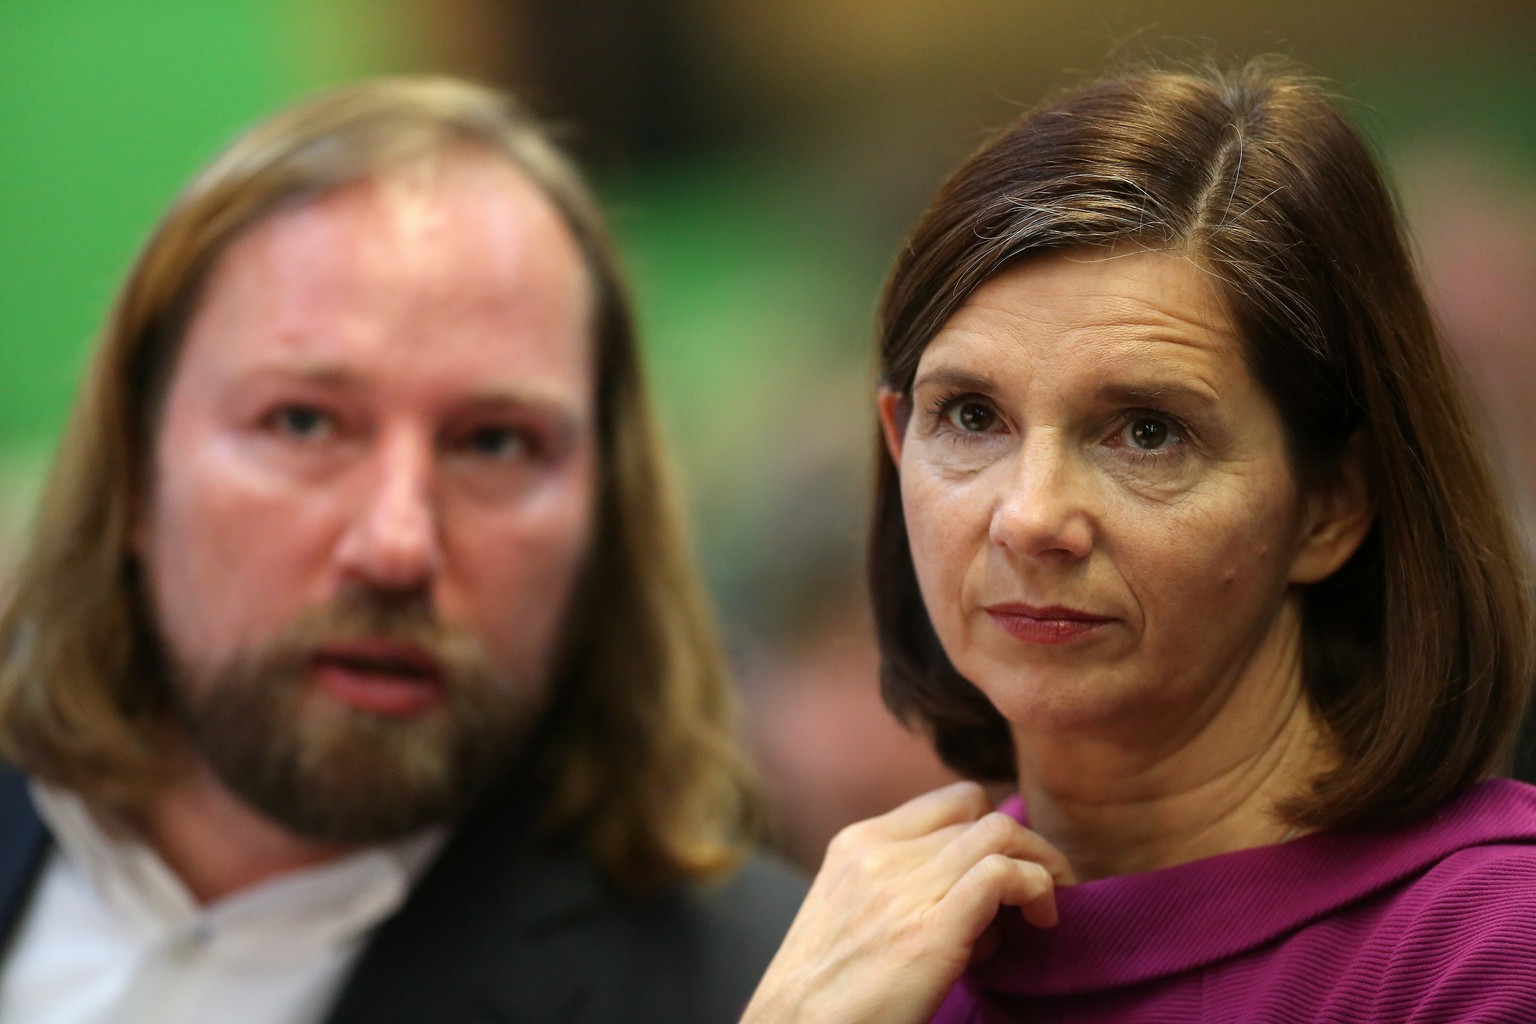 BERLIN, GERMANY - NOVEMBER 25: Green Party Member Anton 'Toni' Hofreiter (L) and co-leader of the Green Party Katrin Goering-Eckardt attend a party federal Congress of Alliance 90/The Greens on Novemb ...